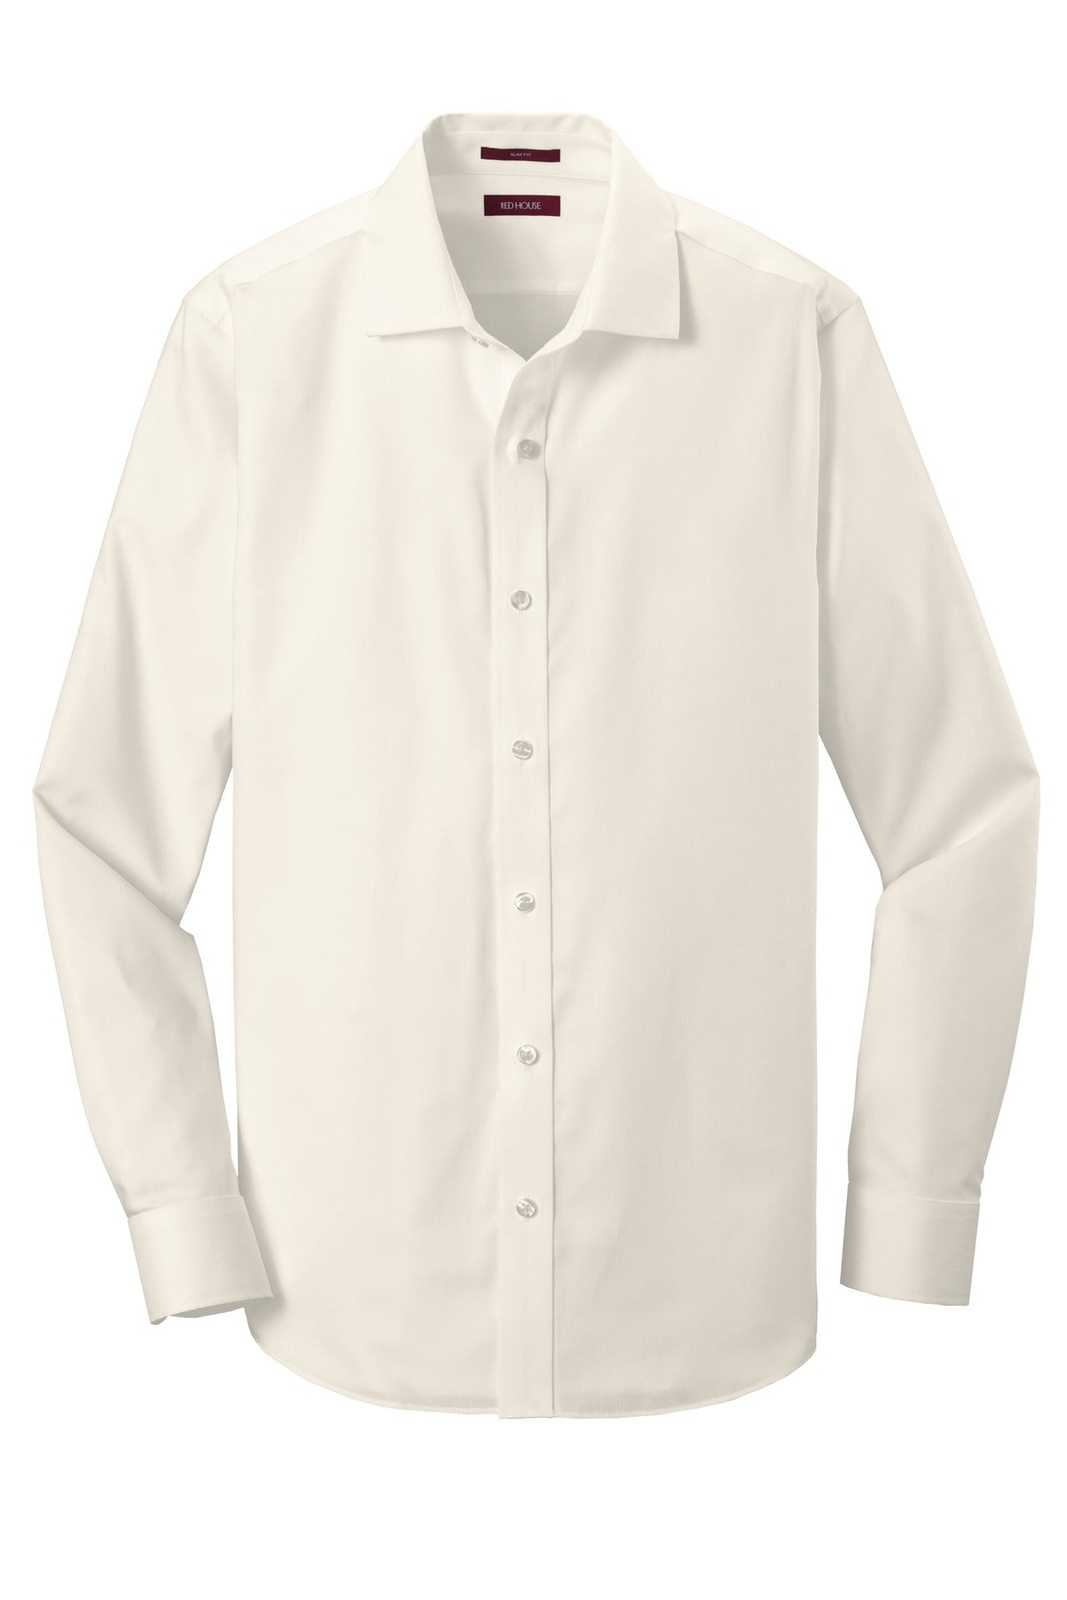 Red House RH620 Slim Fit Pinpoint Oxford Non-Iron Shirt - Ivory Chiffon - HIT a Double - 1